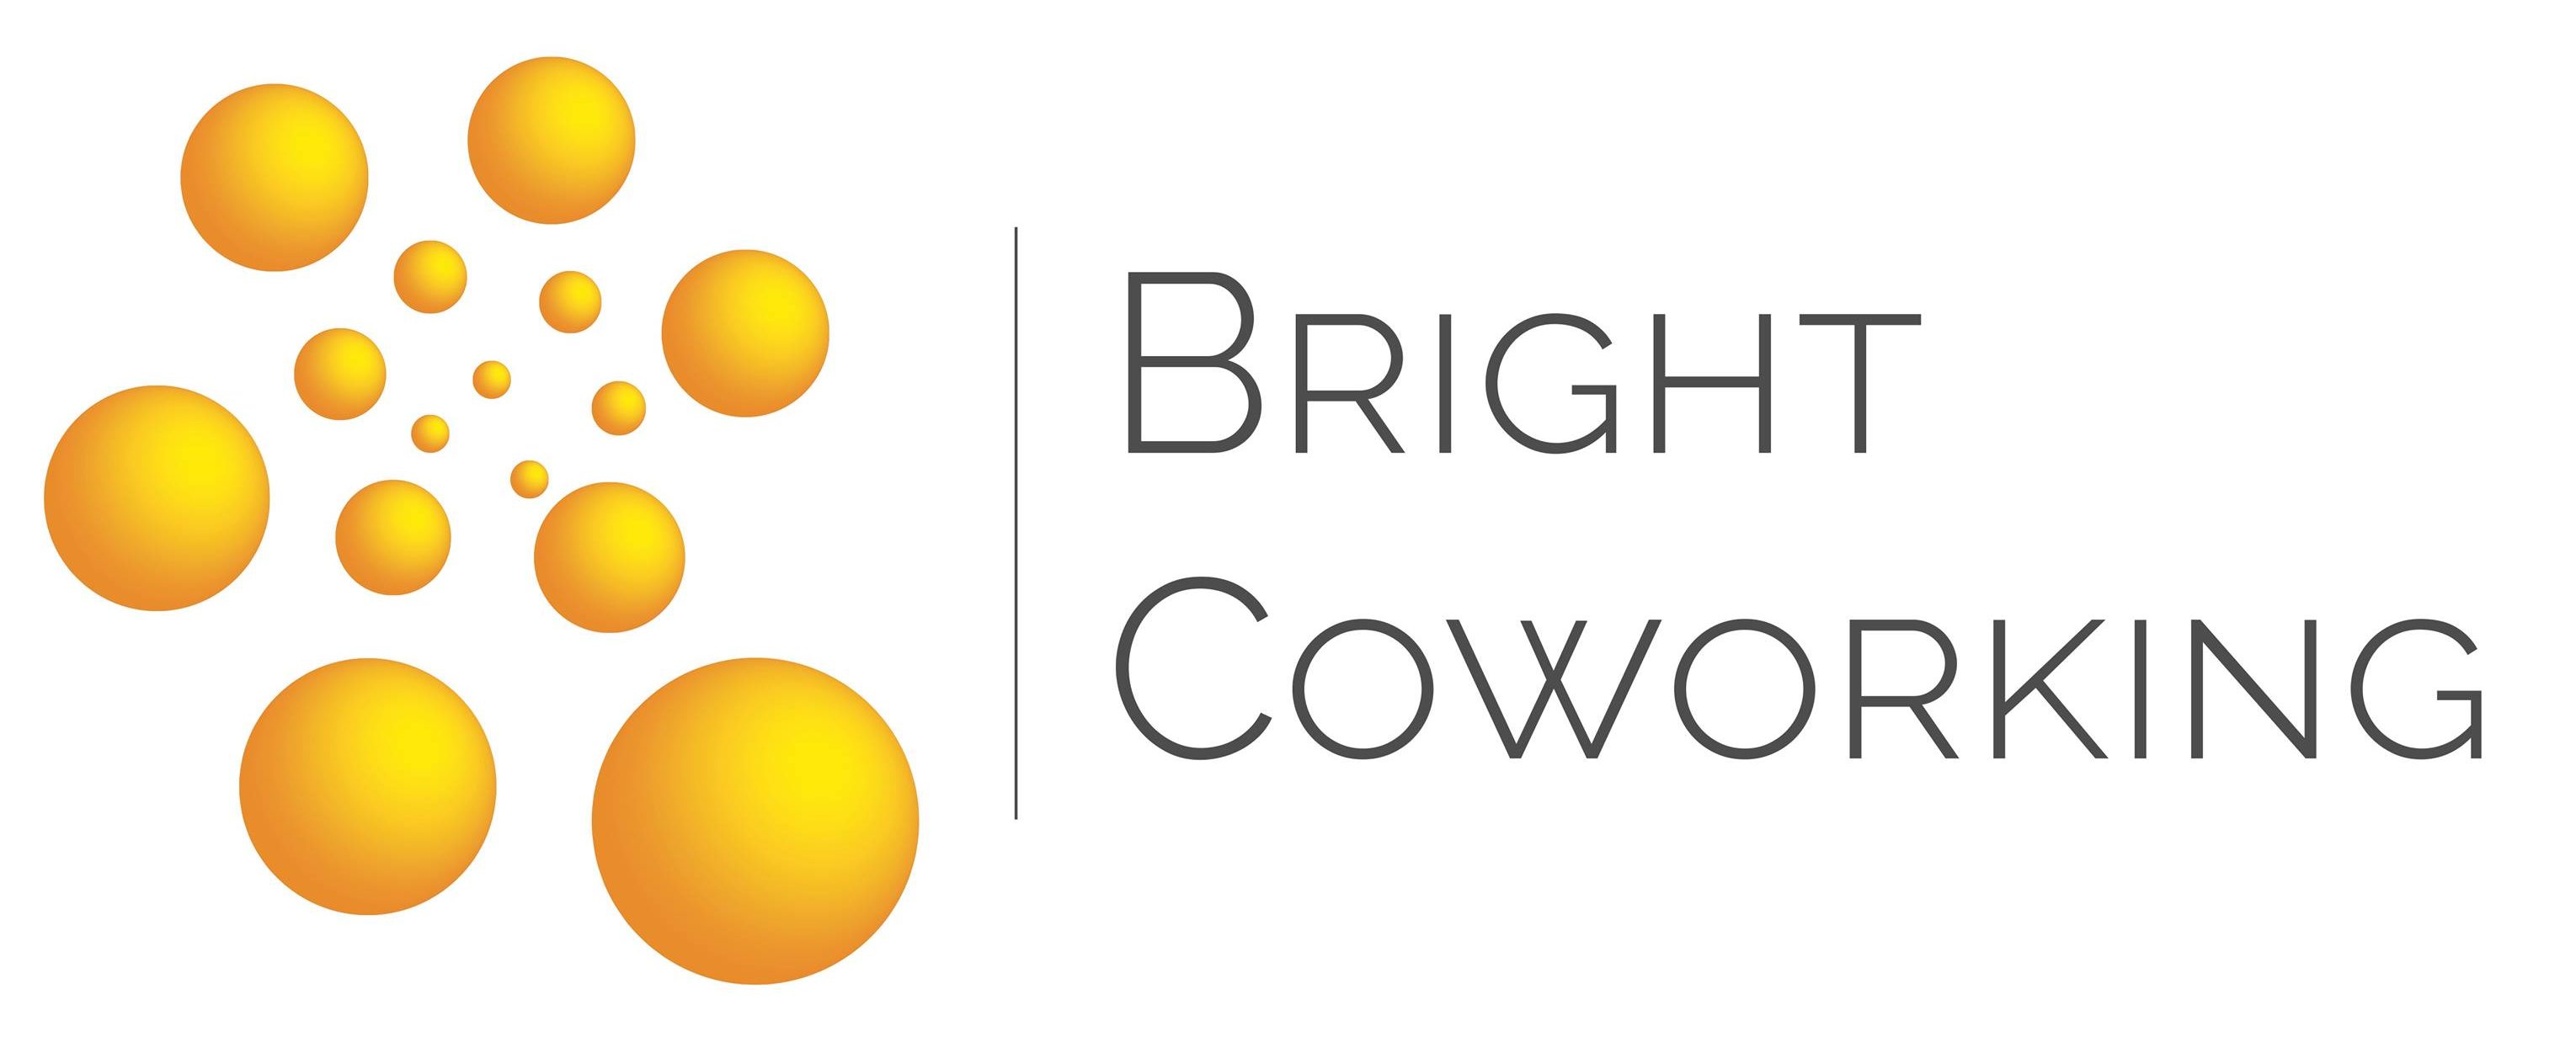 Bright Coworking